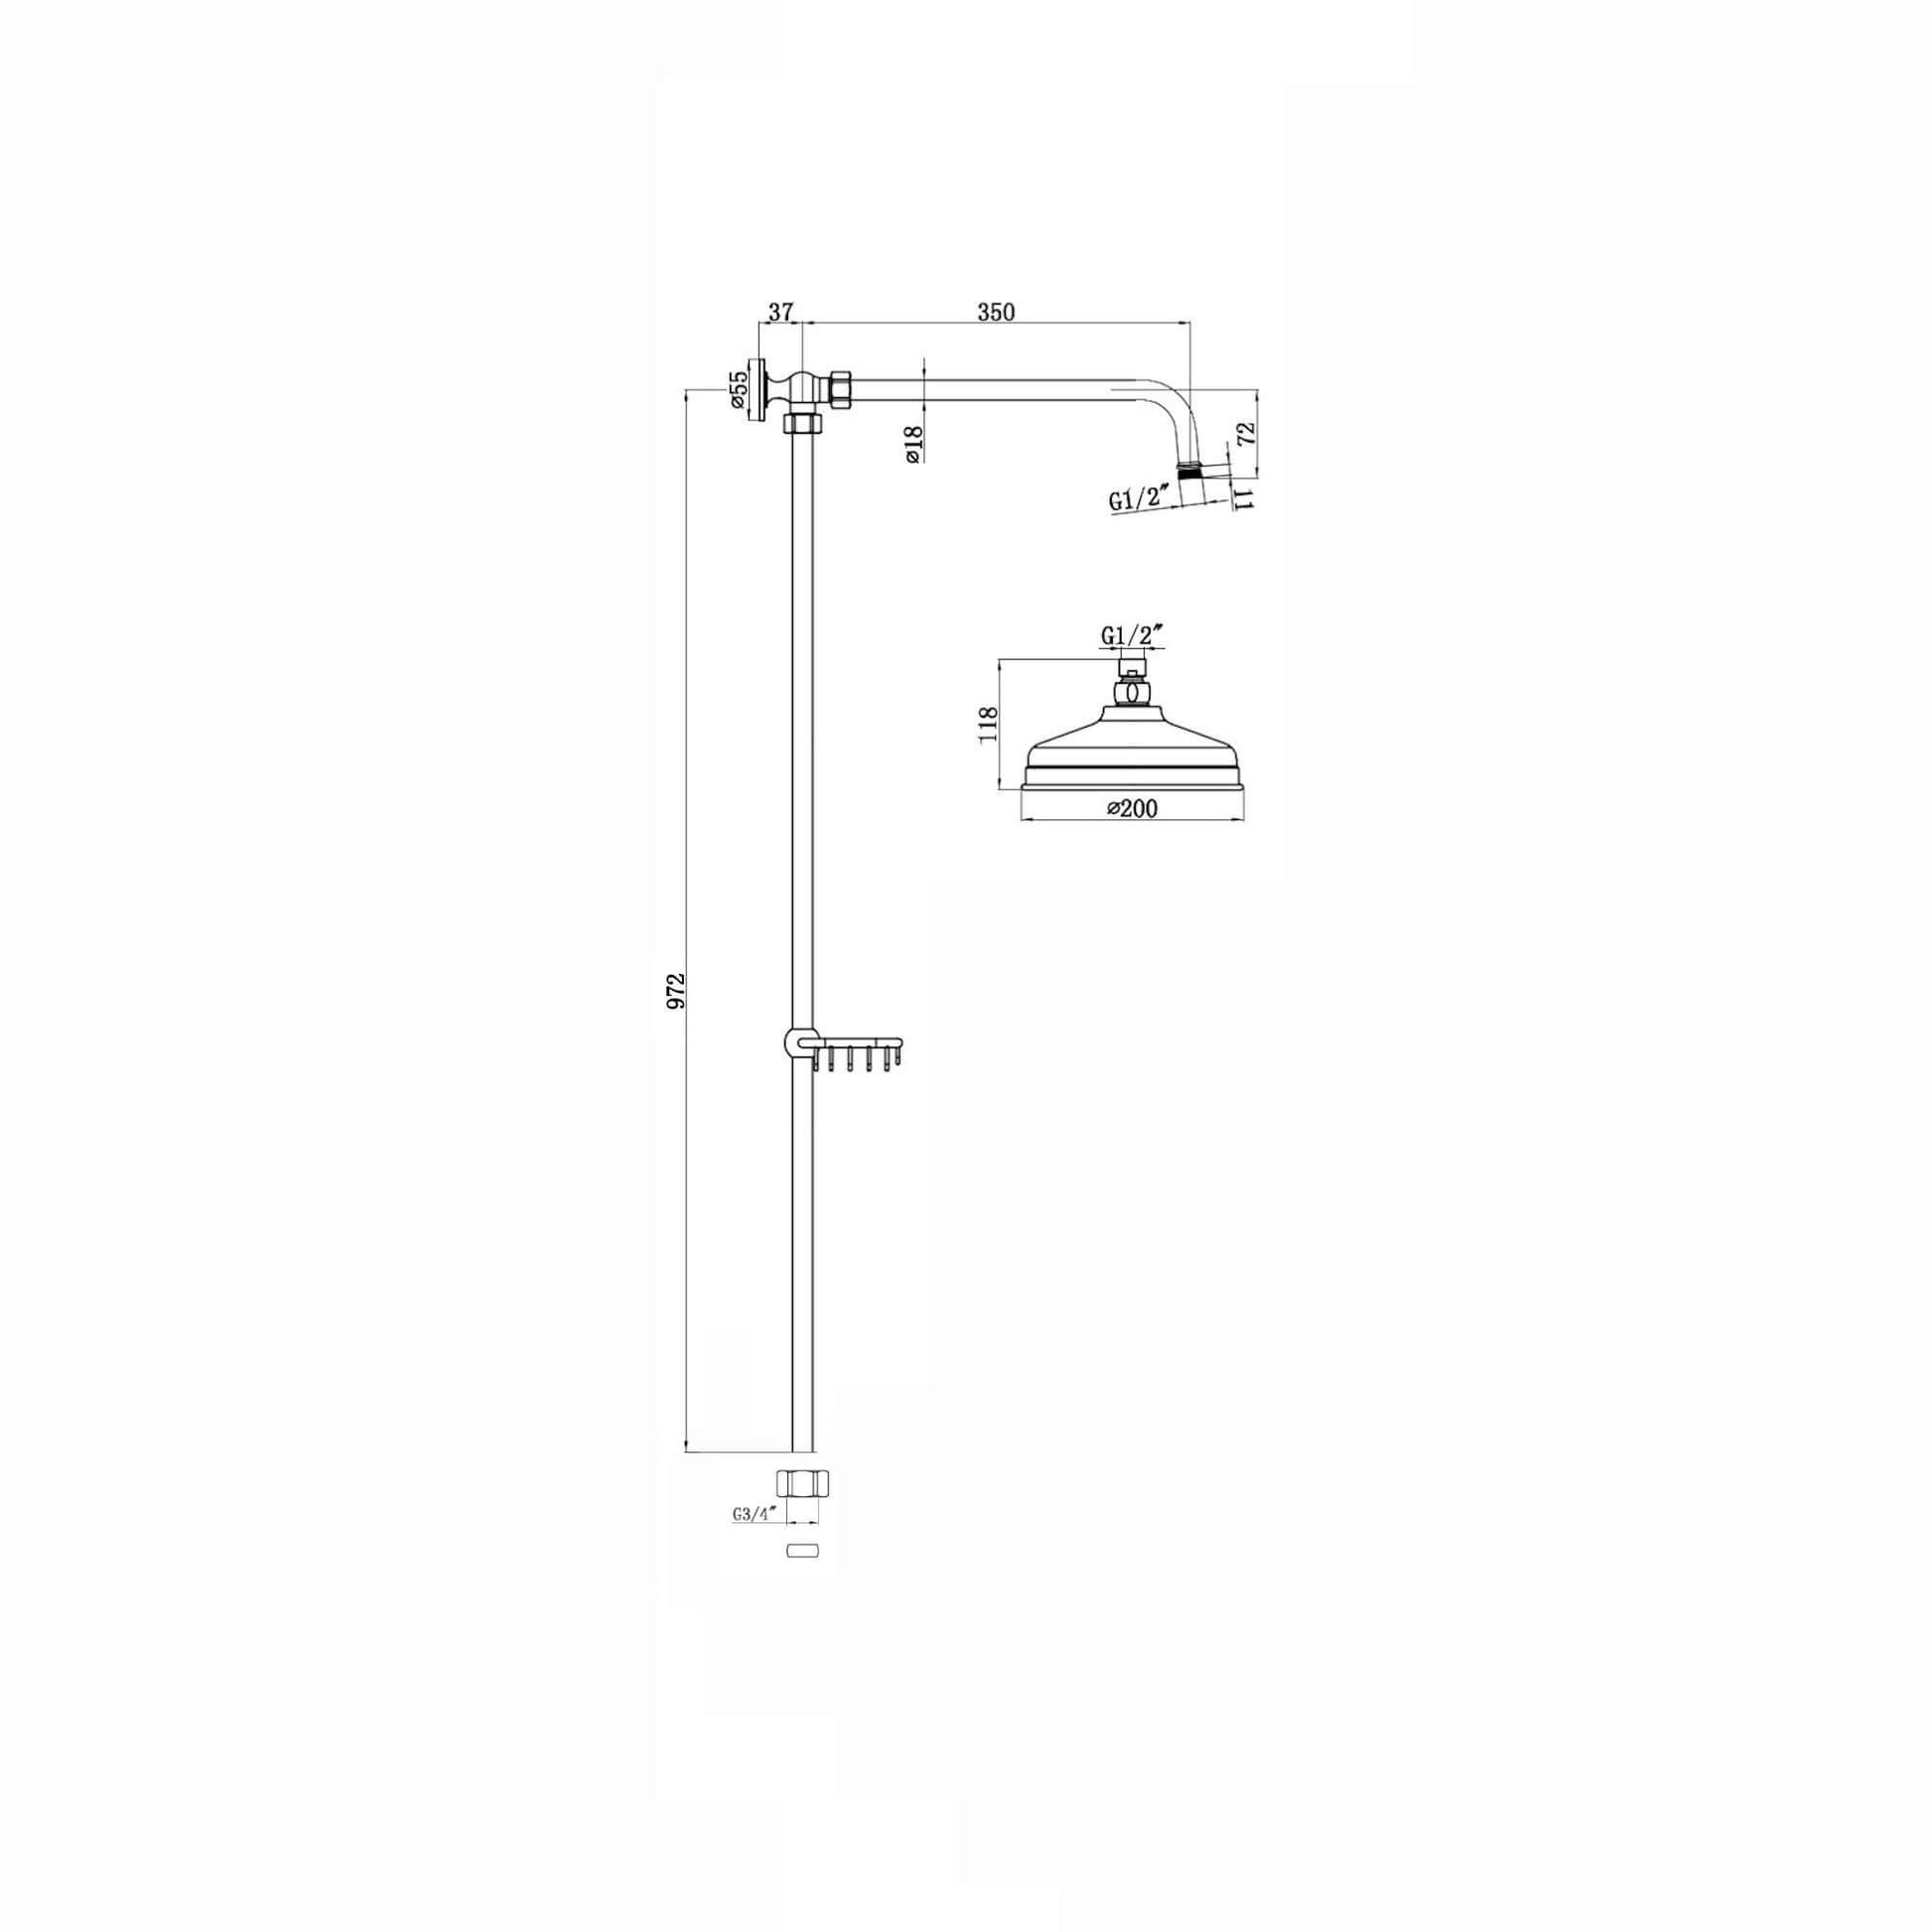 Downton traditional shower riser rail kit with soap dish watercan head 200mm - English gold - Showers